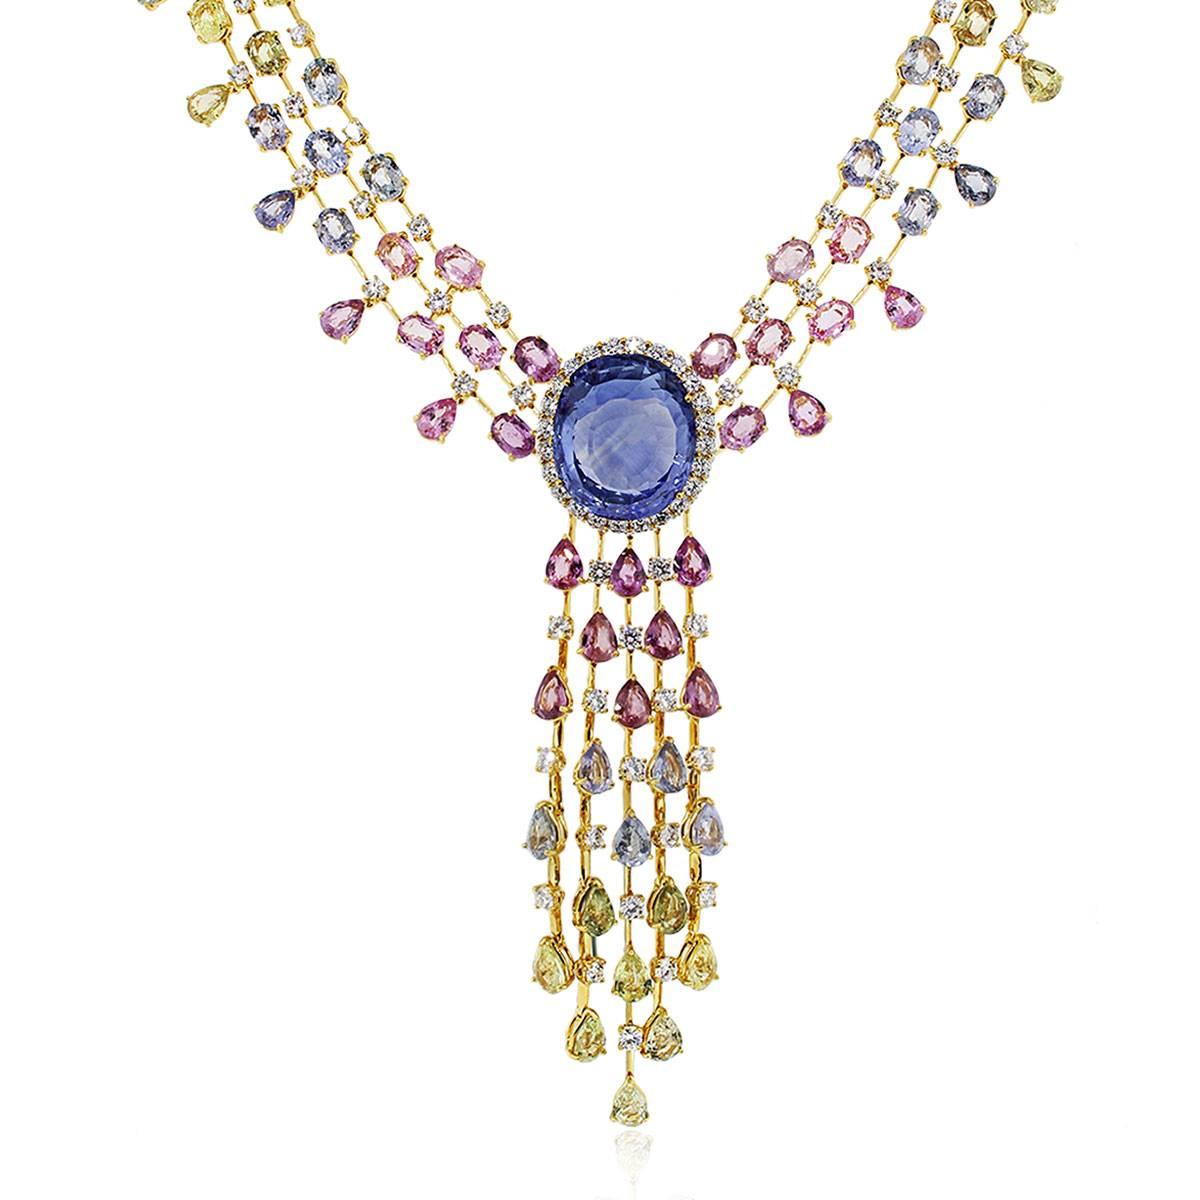 Material: 18k Yellow Gold
Style: Sapphire diamond necklace
Diamond Details: 113 round brilliant cut diamonds approx. 11.72ctw. Diamonds are G/H in color and VS in clarity.
Center Stone Details: Center oval shape sapphire is approx. 48.85ct (No heat